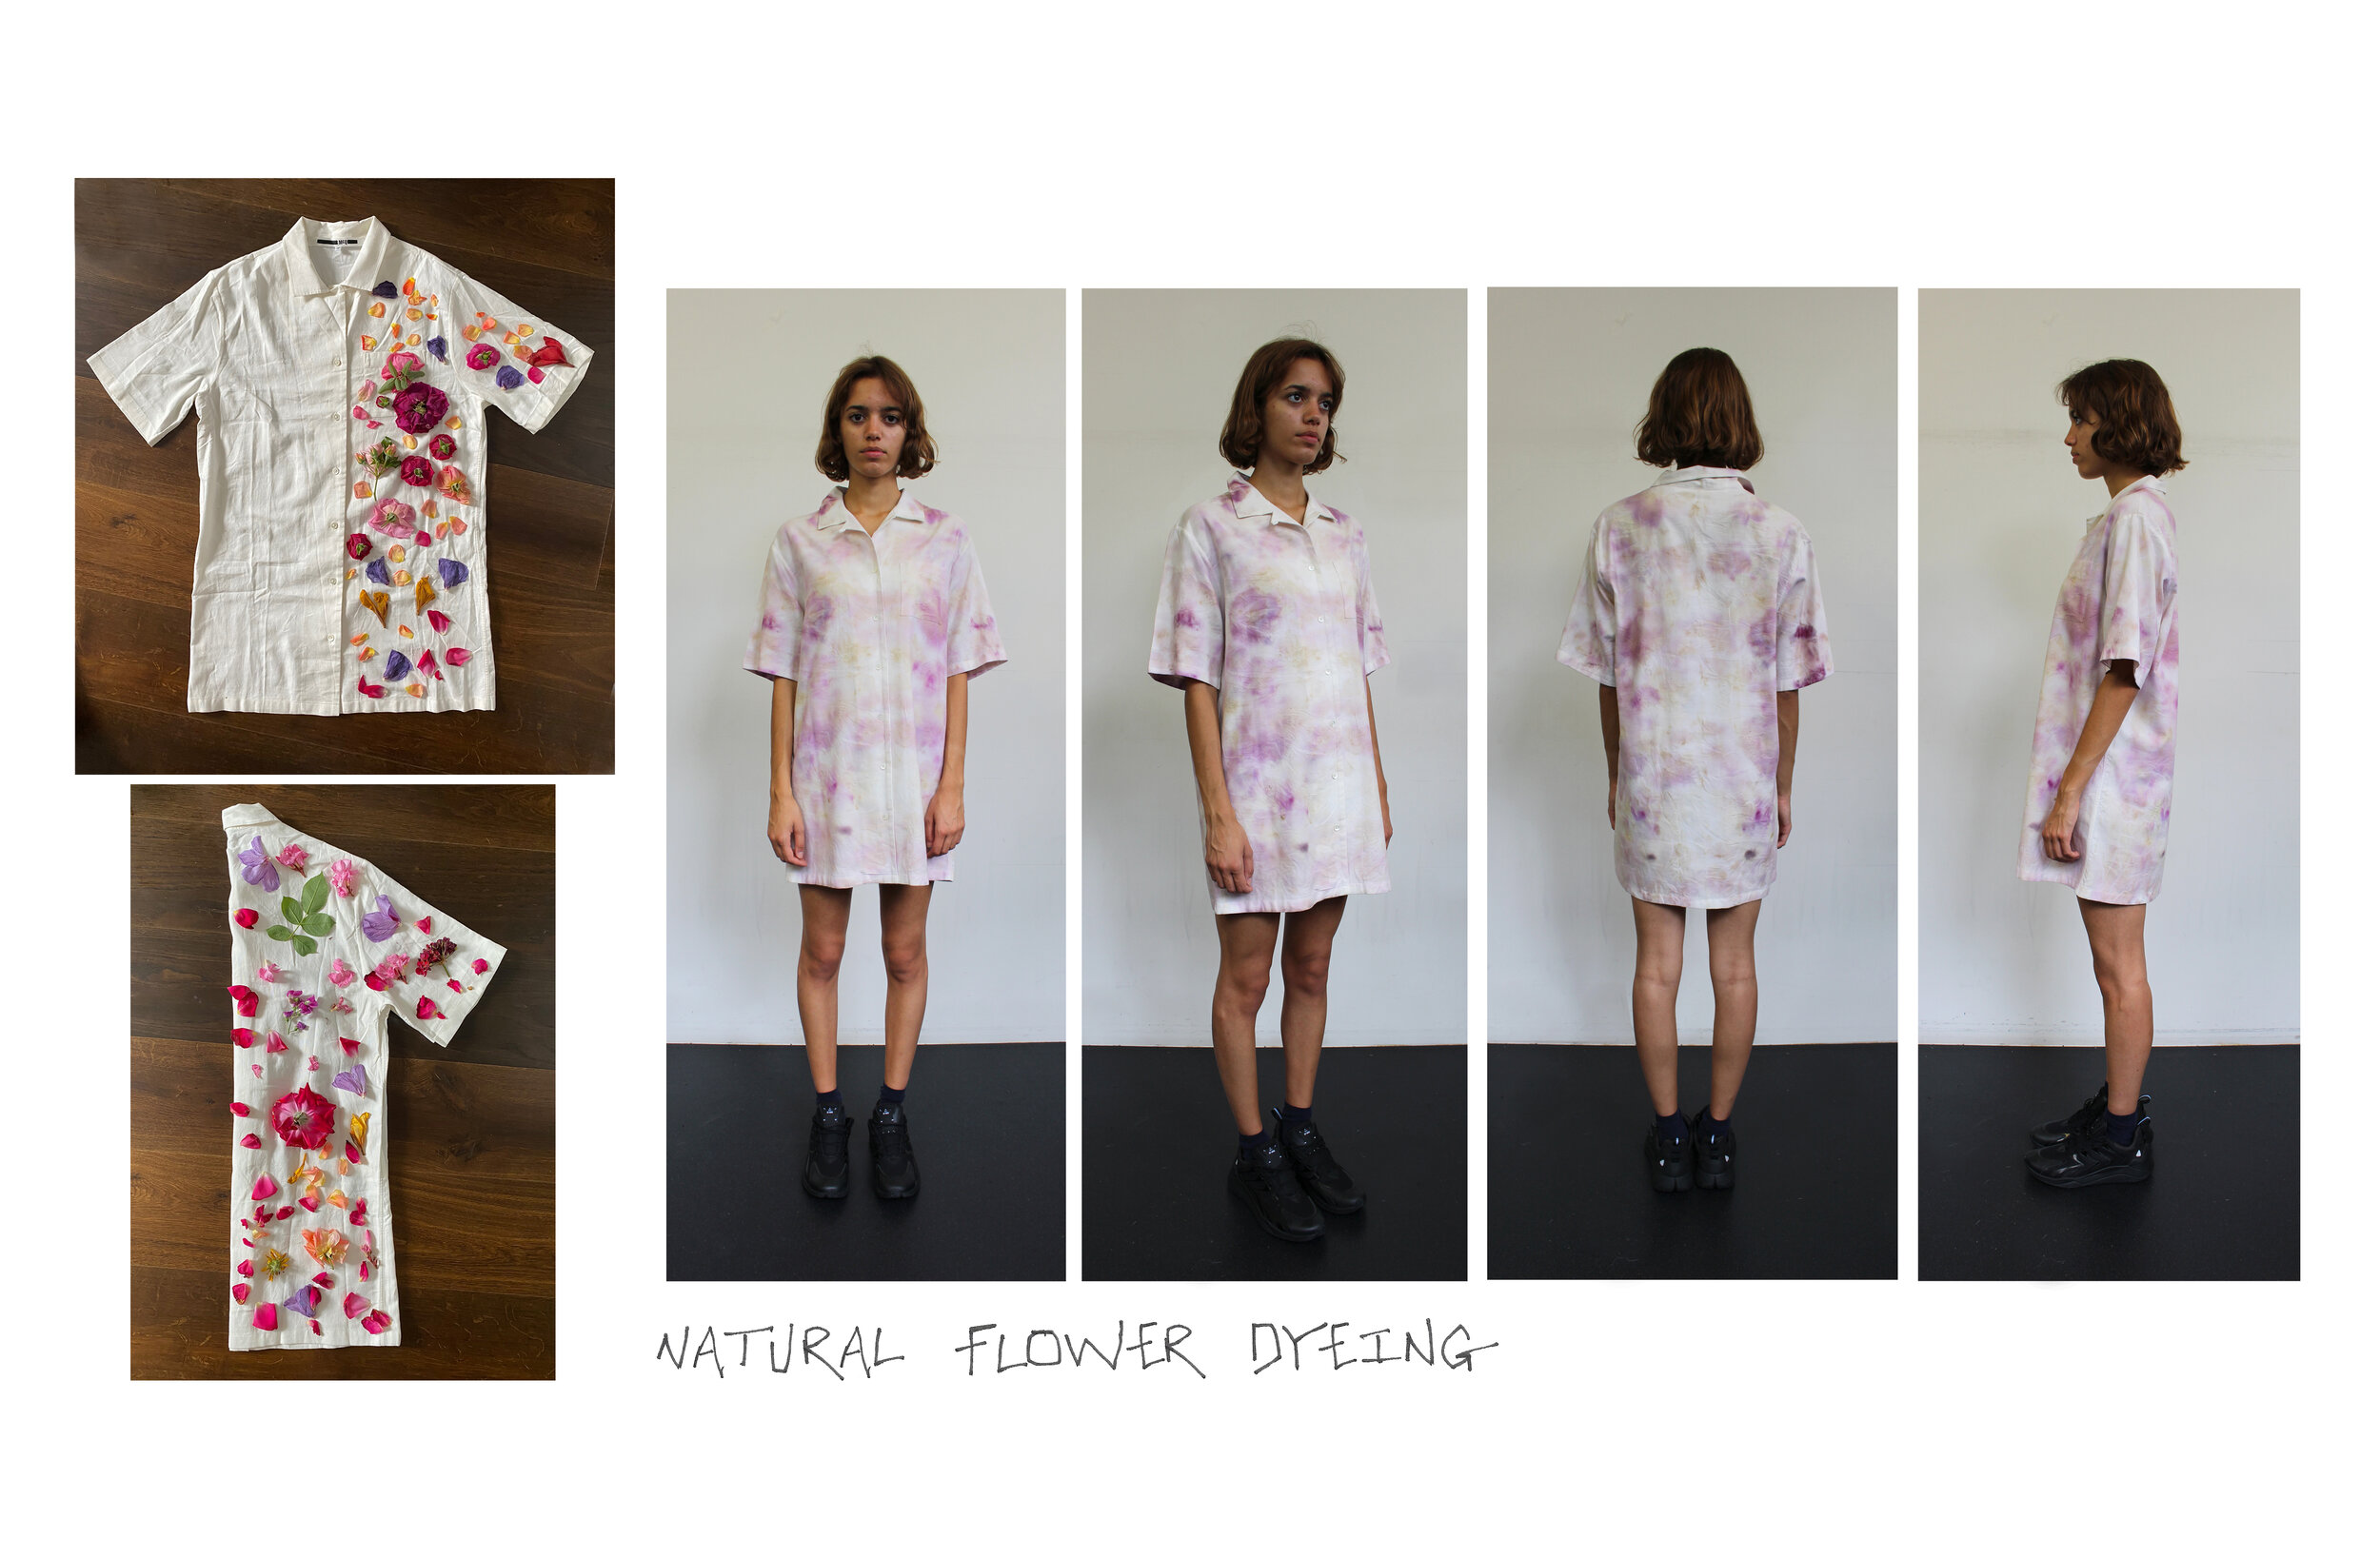  Flower dying experimentation for MCQ Grow up collection  